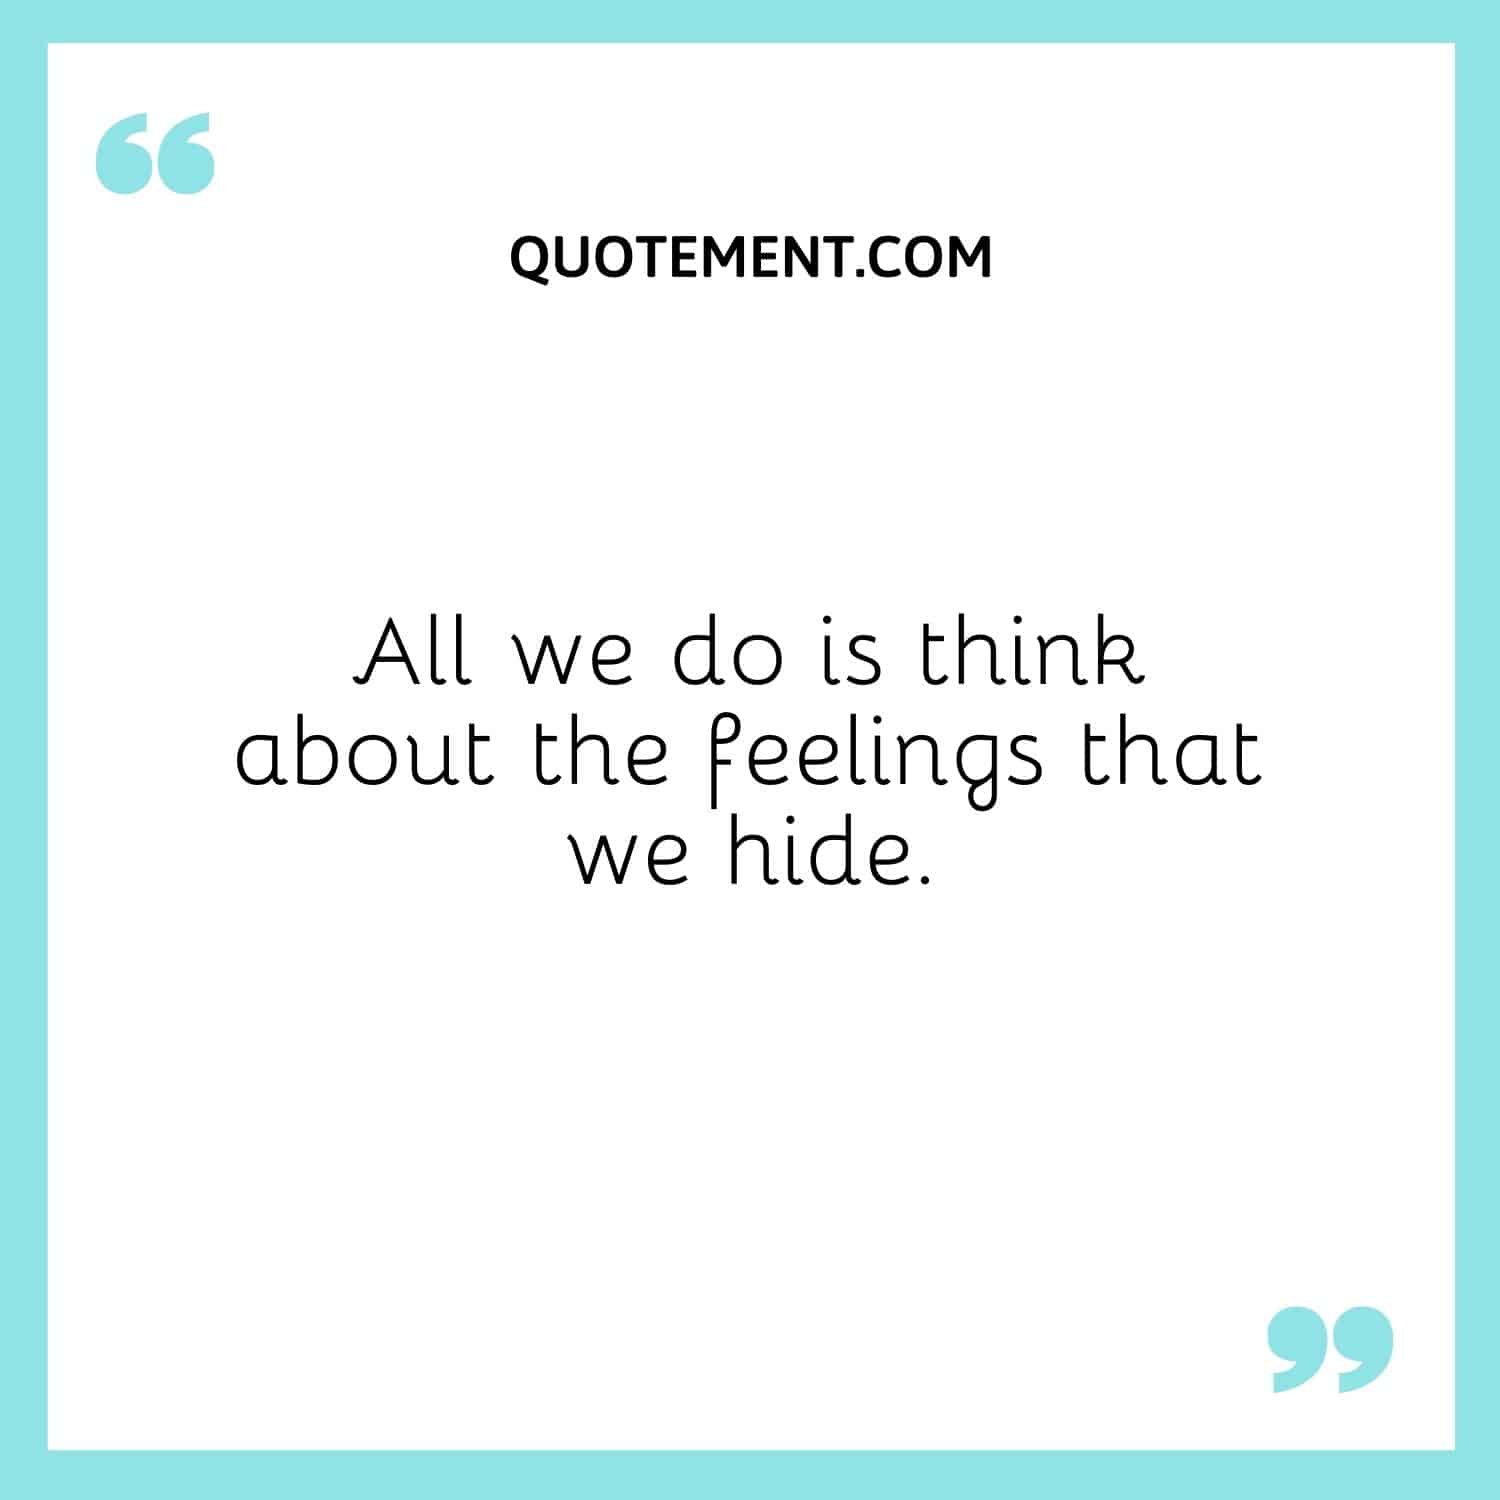 All we do is think about the feelings that we hide.